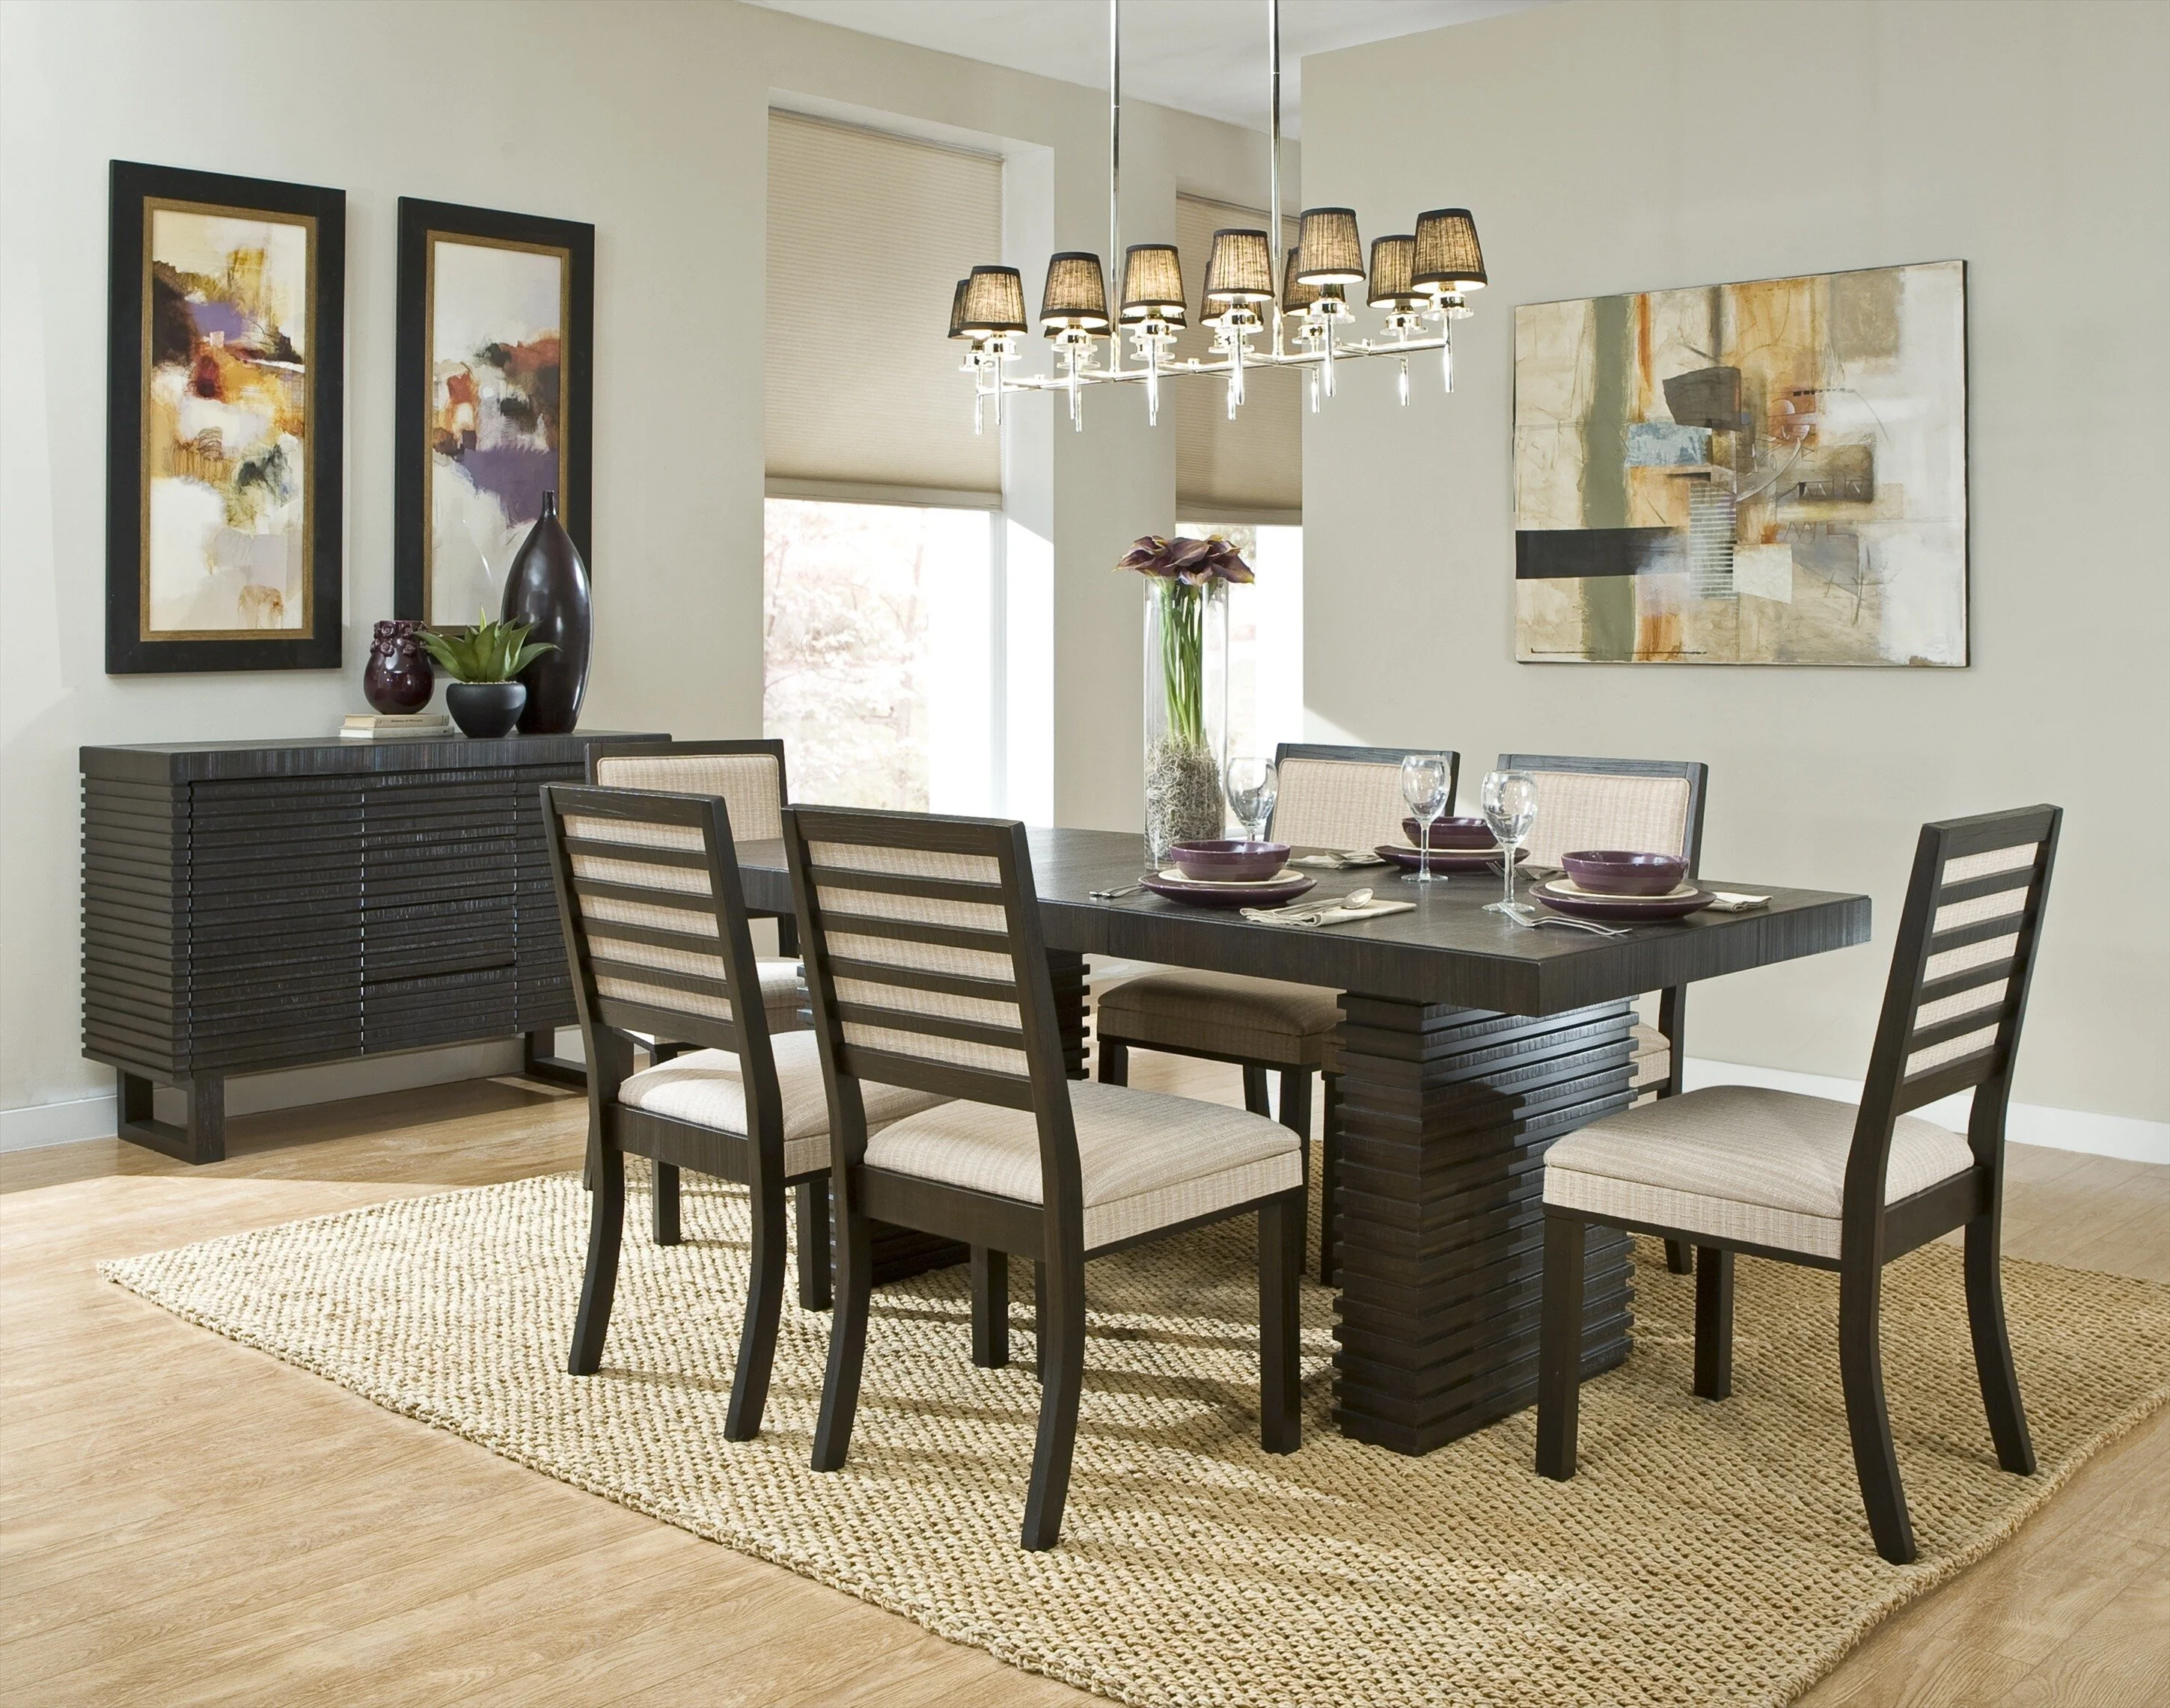 Dining Room Interior Dining Room Dark Hardwood Furniture Polished Modern Decors Chandelier Lamps Decorate Grey Admirable For Beautiful Chandelier For Dining Room Design Idea Choosing Wonderful Designer Glass Dining Table Inside Contemporary Dining Room Design Ideas